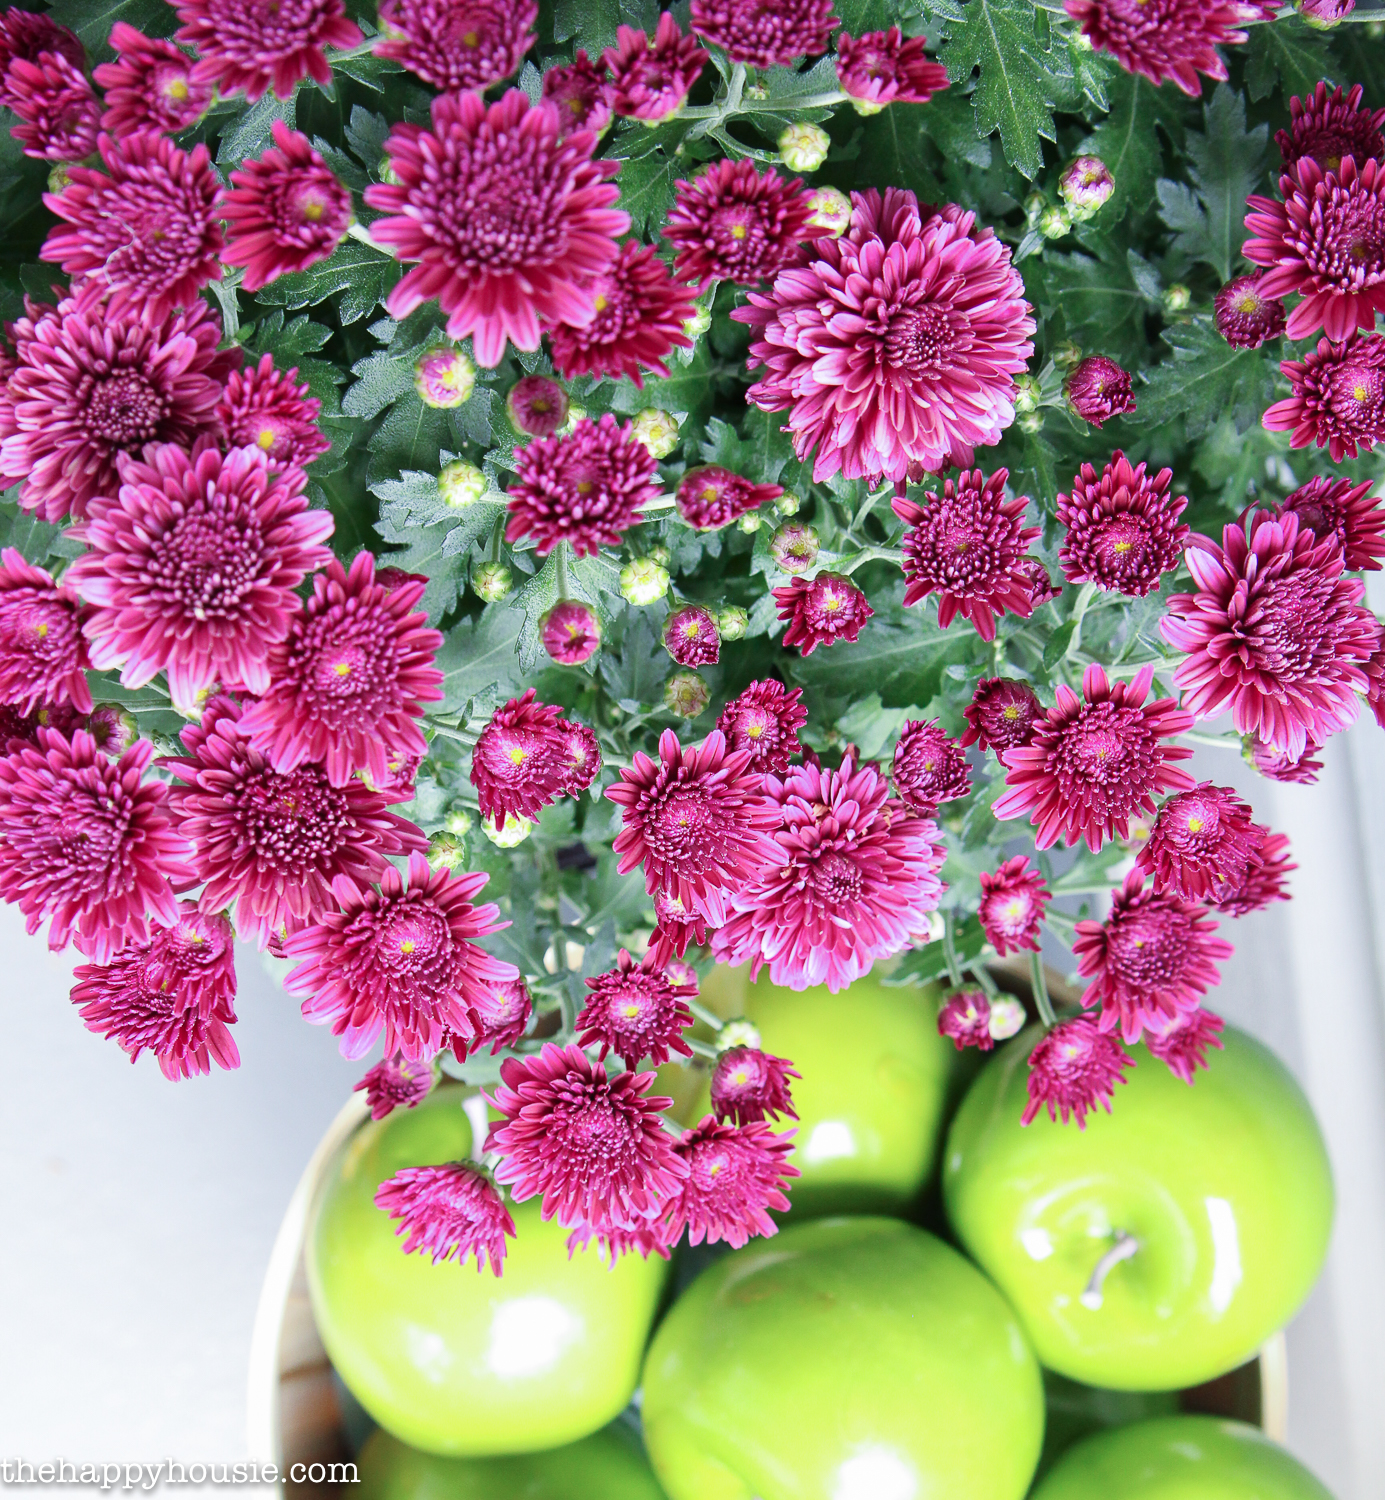 Green apples are underneath the purple flowers.